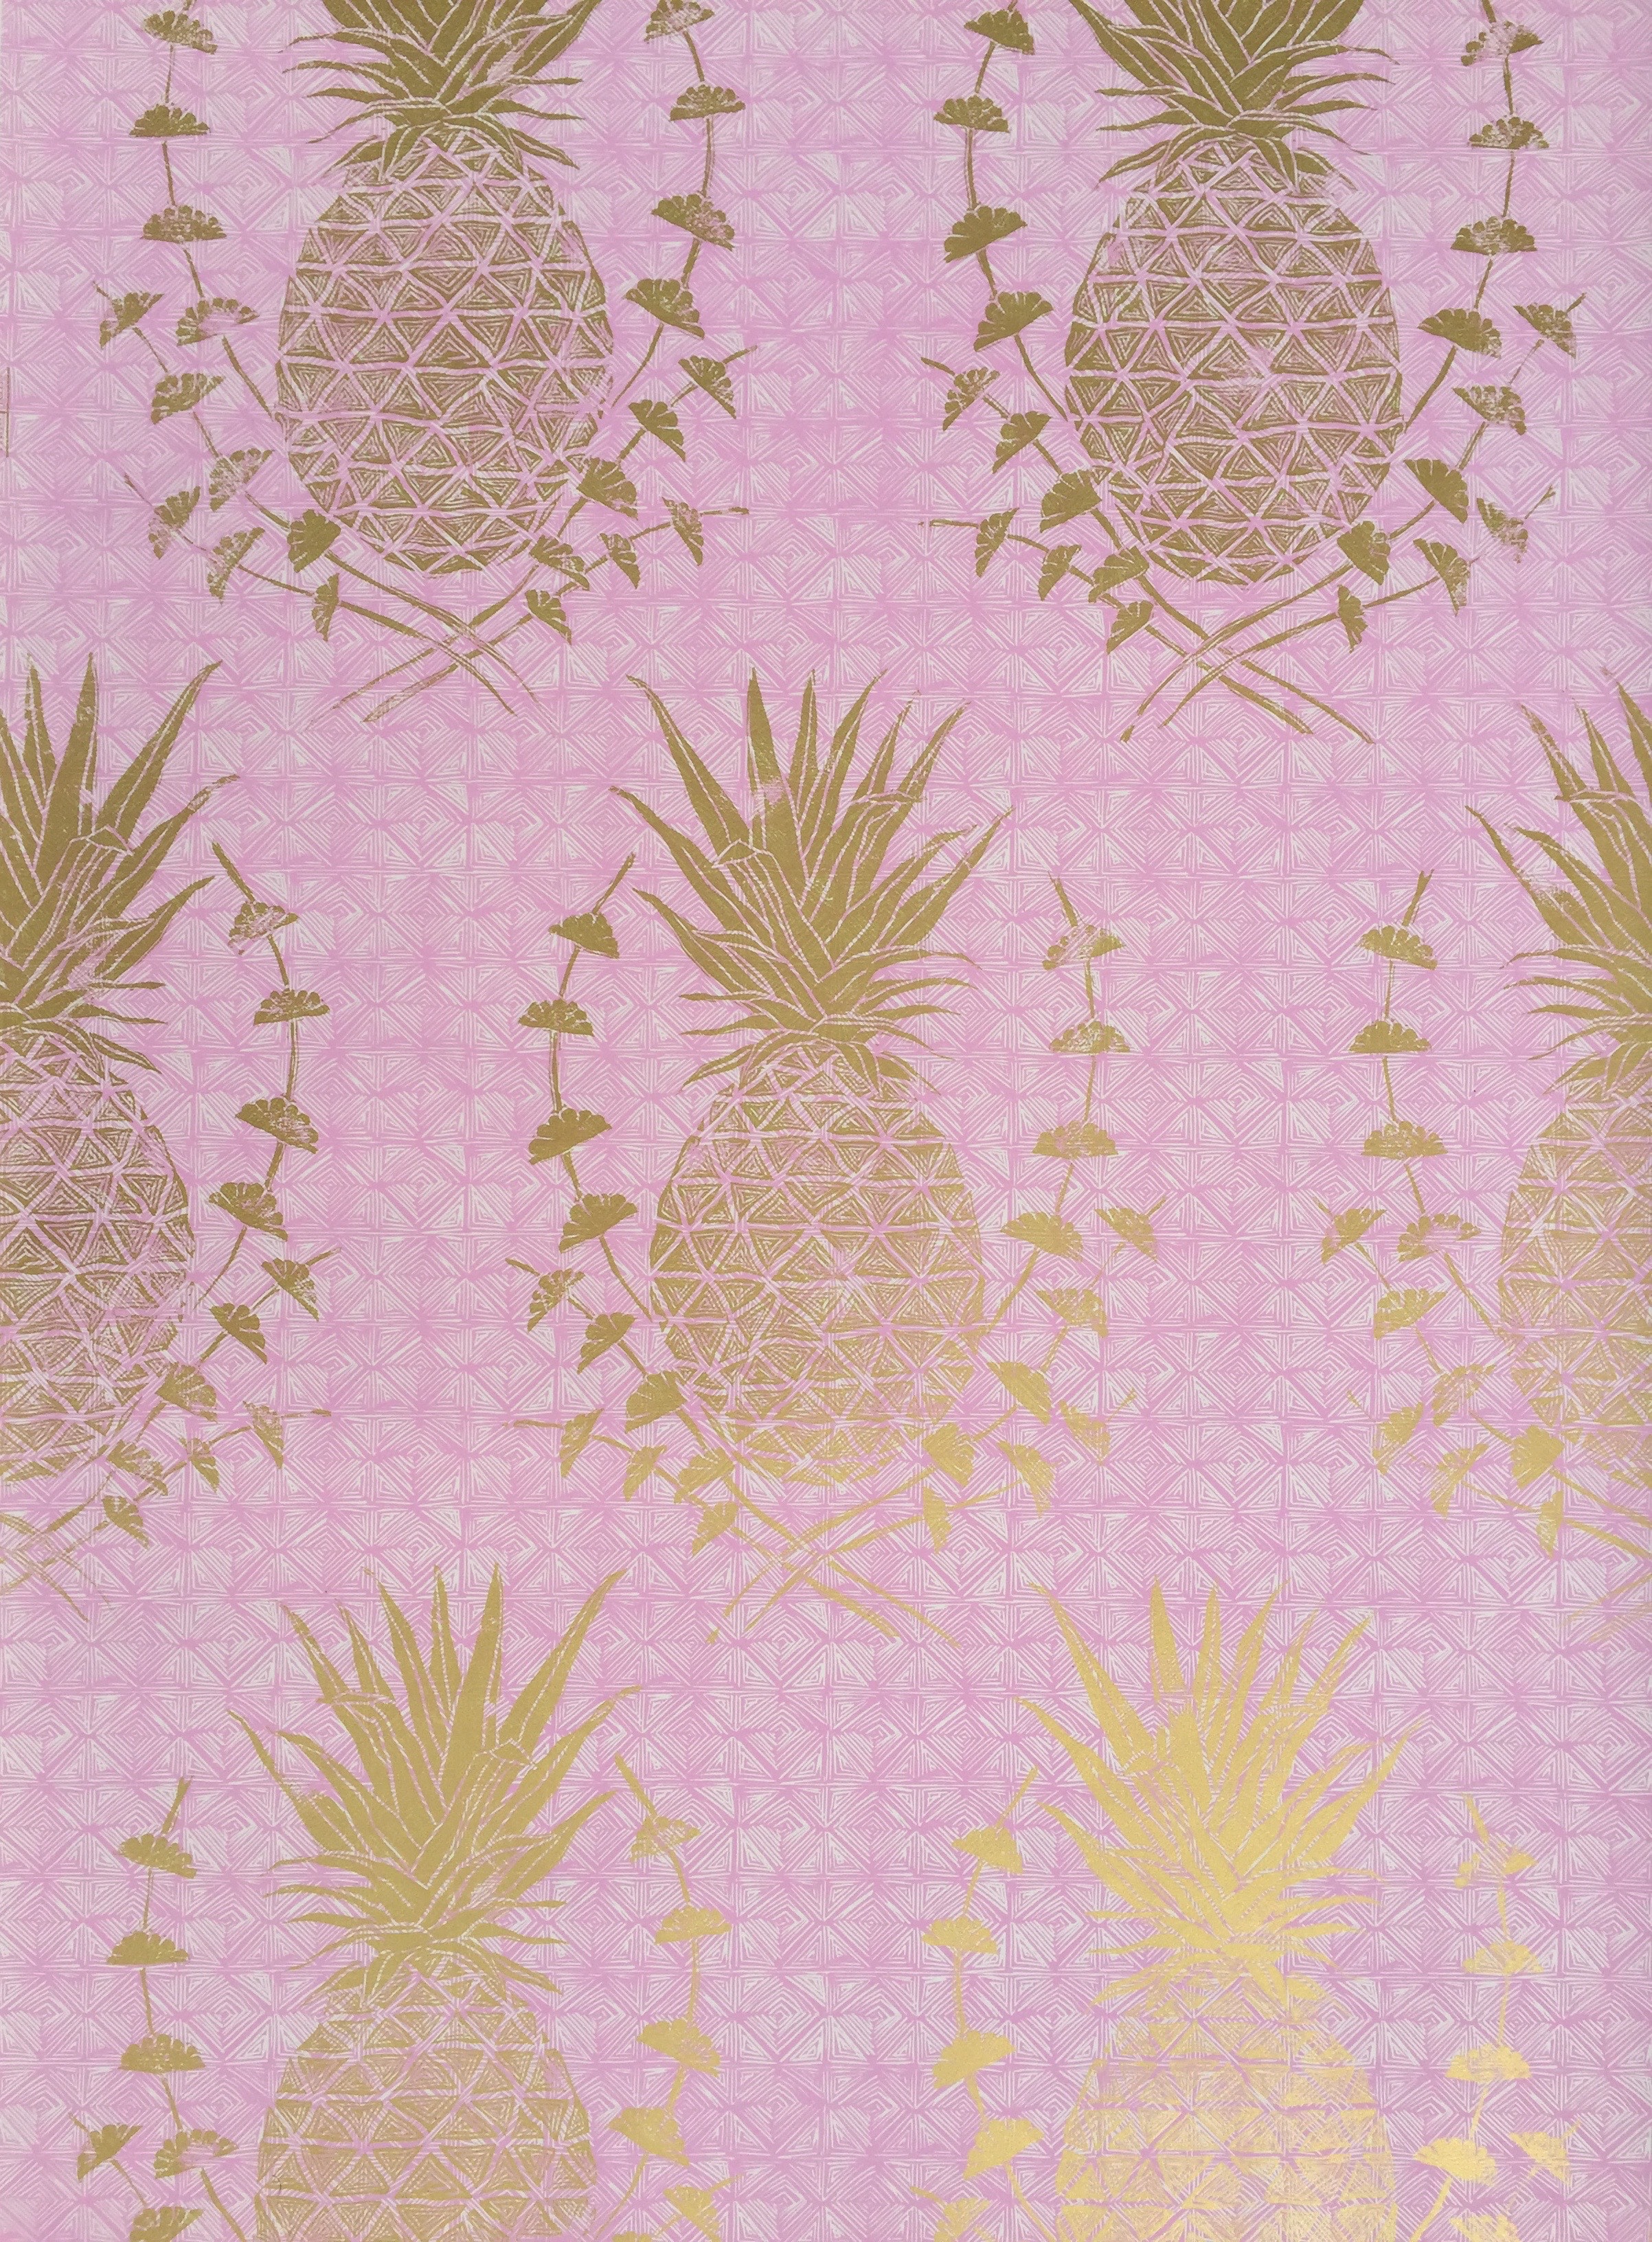 Gold Pineapples On Pink - HD Wallpaper 